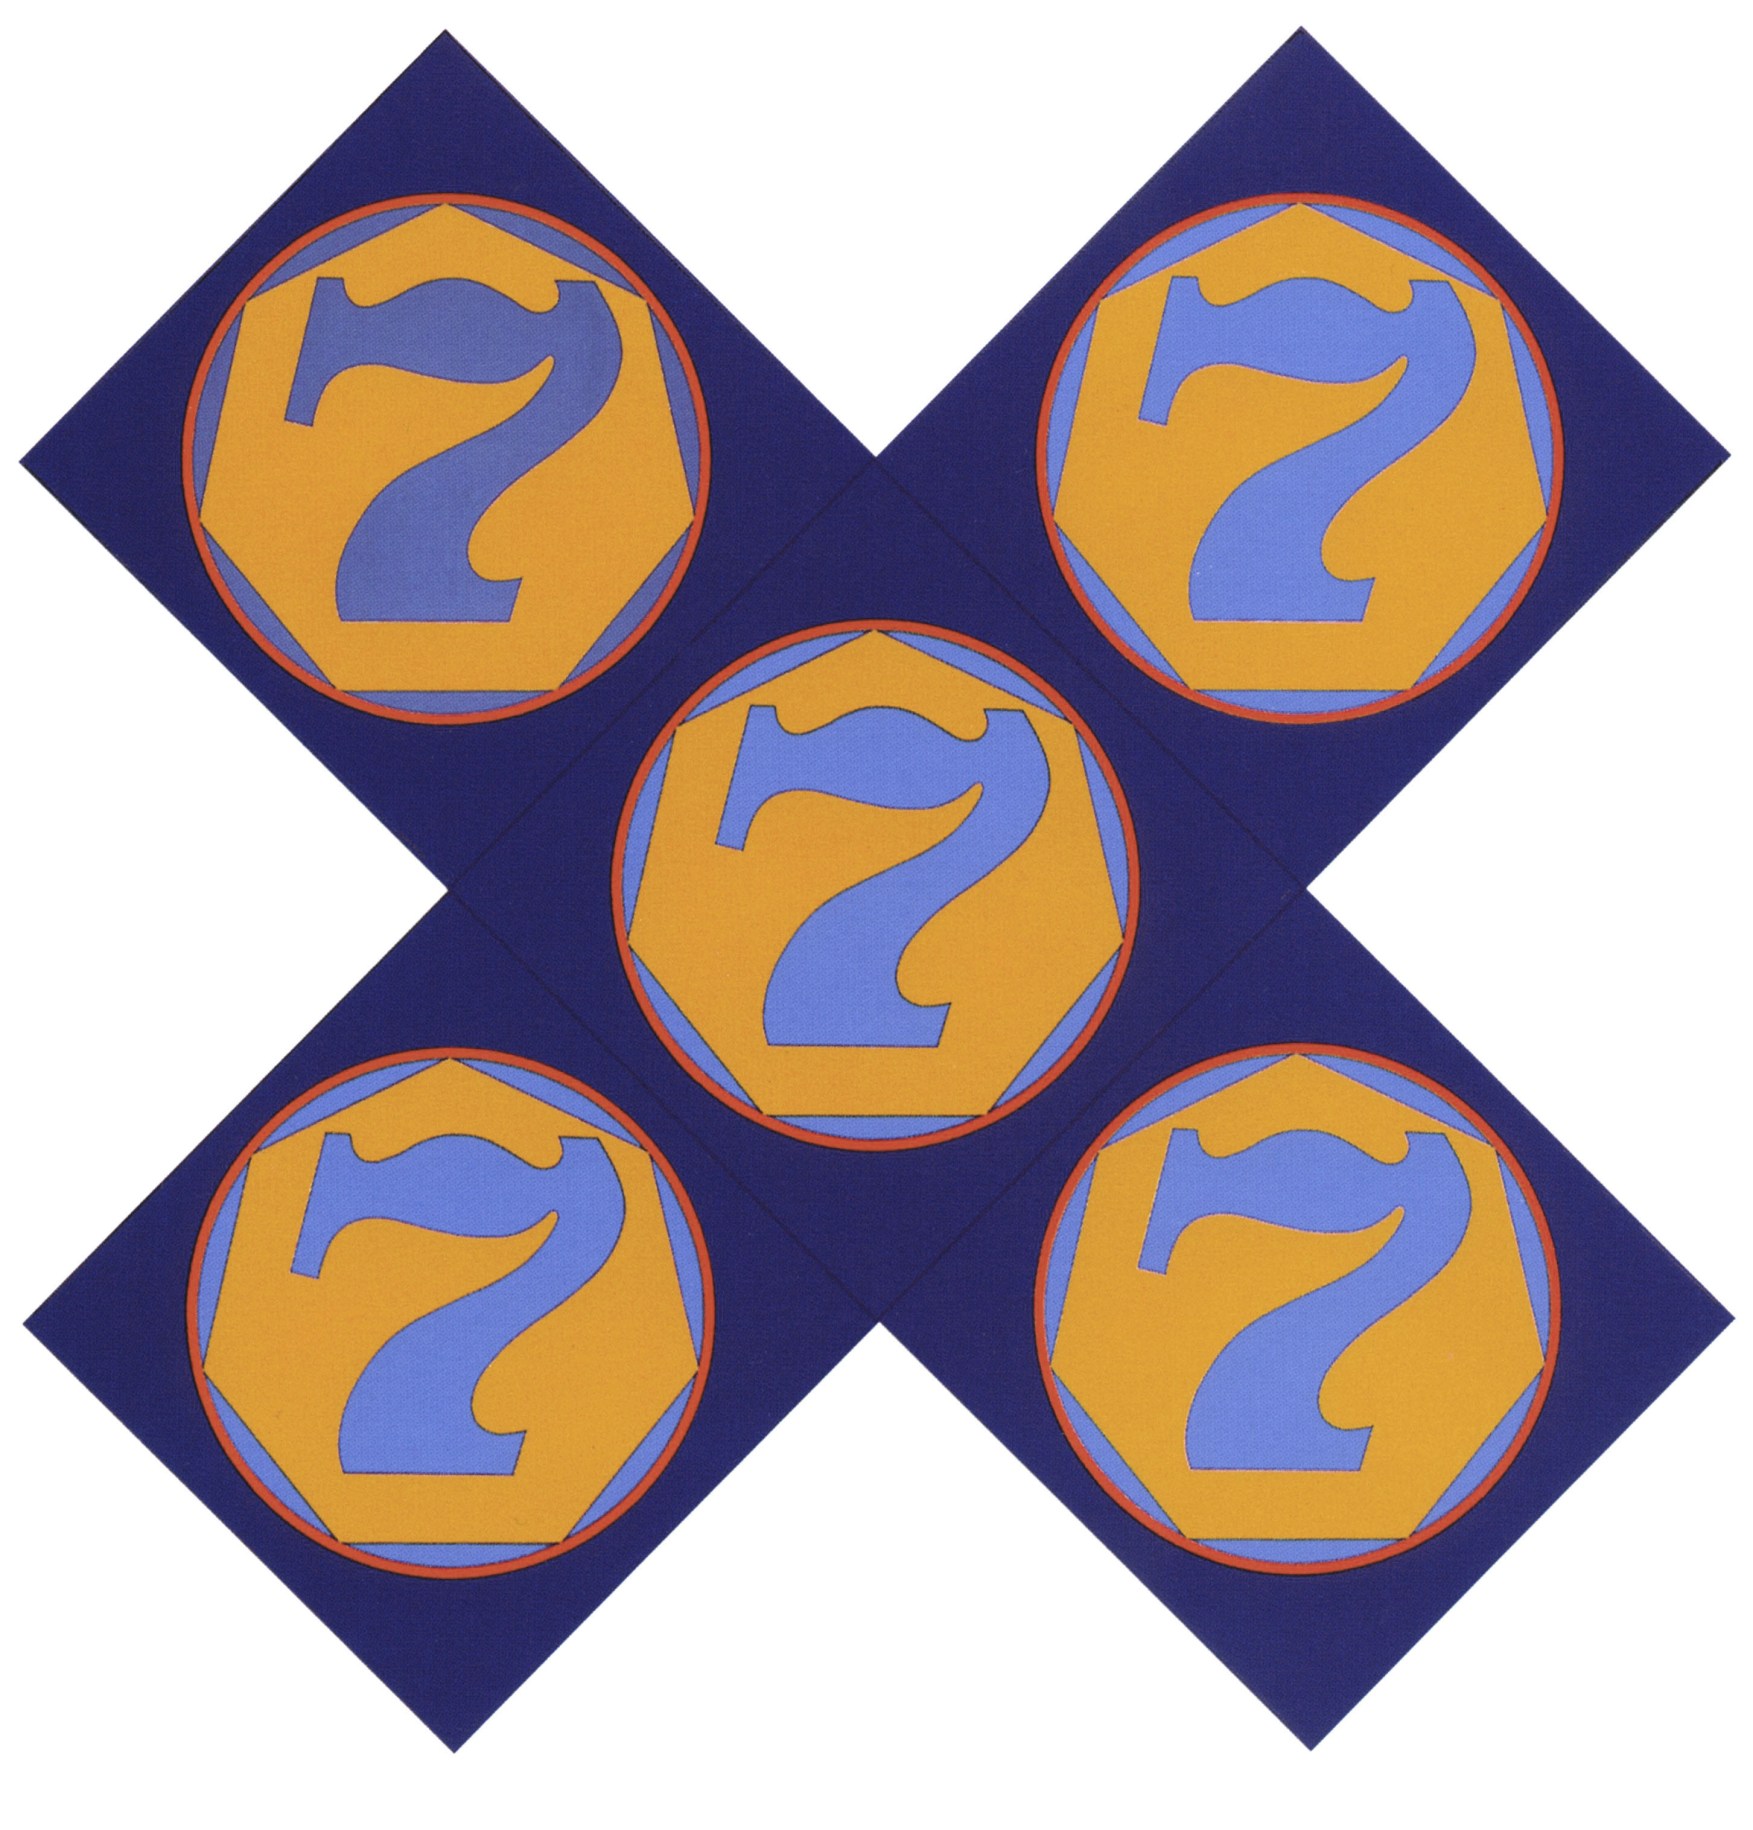 The X-7 is an X-shaped painting comprised of five panels and measuring 170 by 170 inches overall. All five panels are identical, with a dark blue ground, and dominated by a dark orange outlined circled containing a light orange heptagon with a light blue numeral seven.